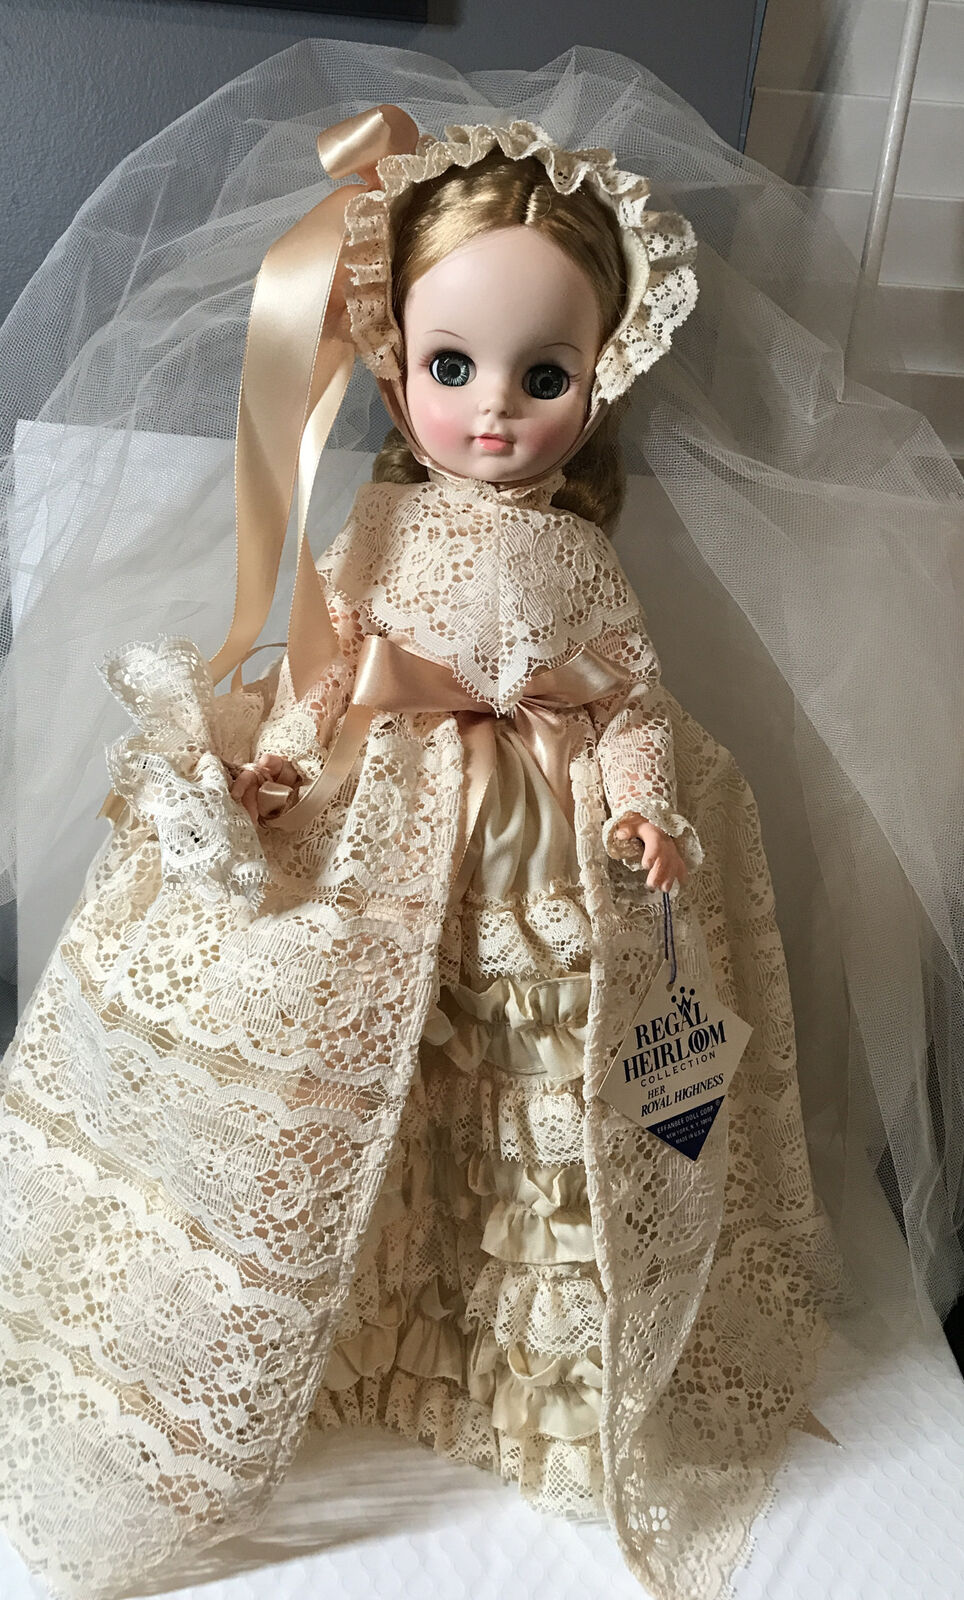 Effanbee Doll Corp.-Regal Heirloom Collection-Her Royal Highness W/Stand 